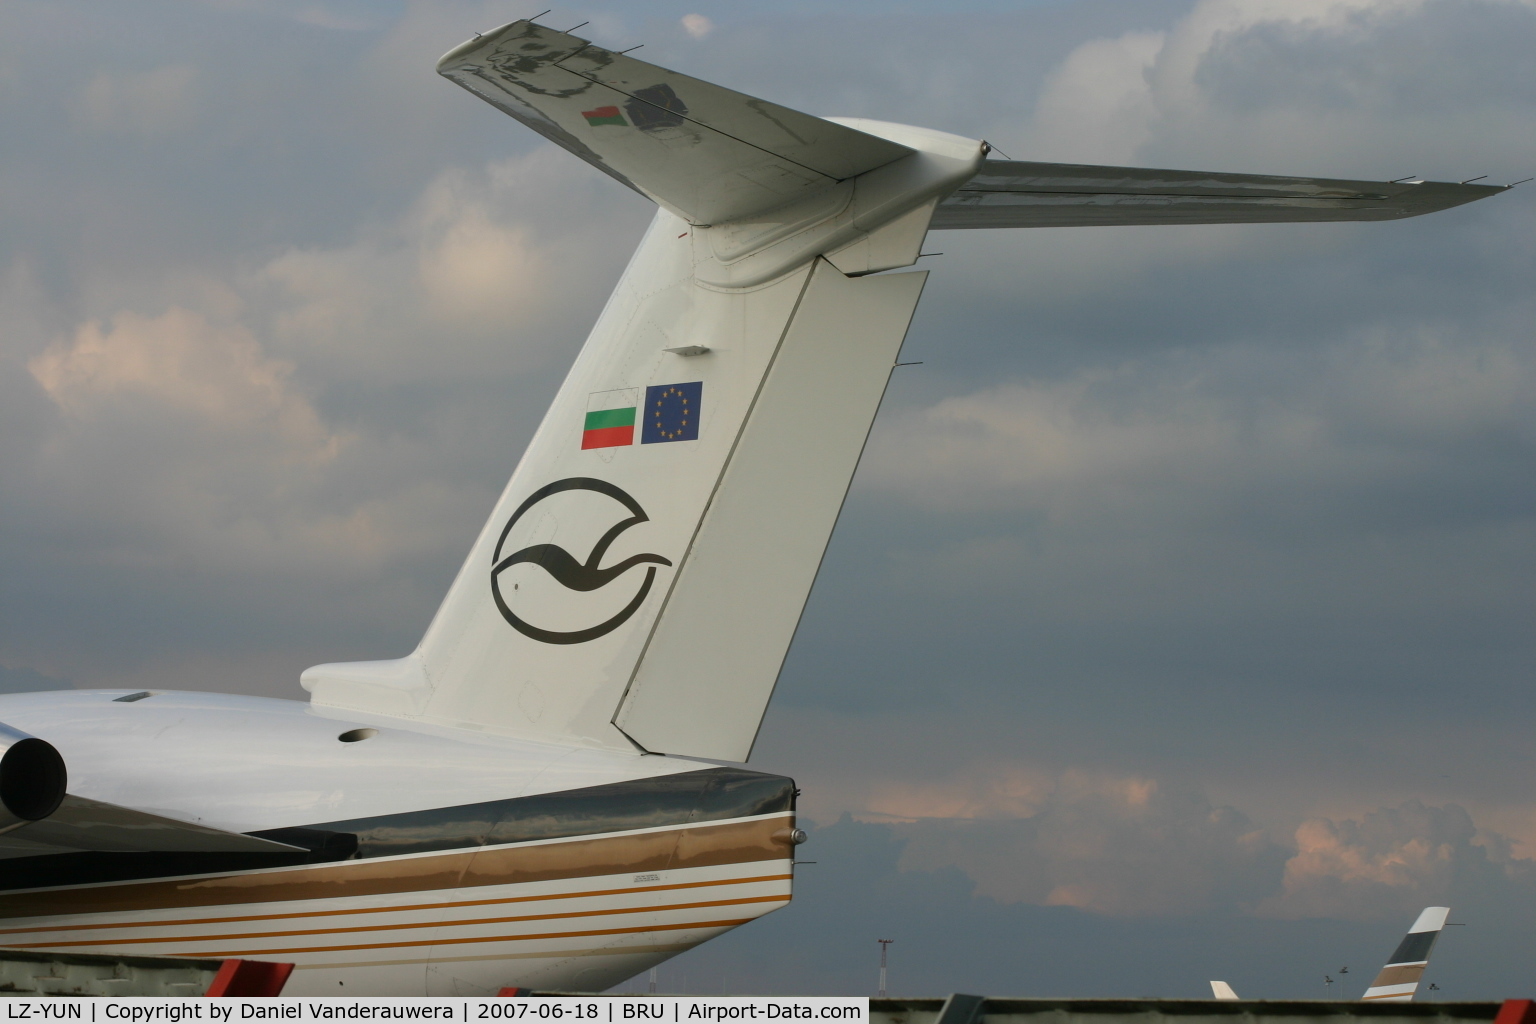 LZ-YUN, 2005 Bombardier Challenger 604 (CL-600-2B16) C/N 5508, close-up of tail